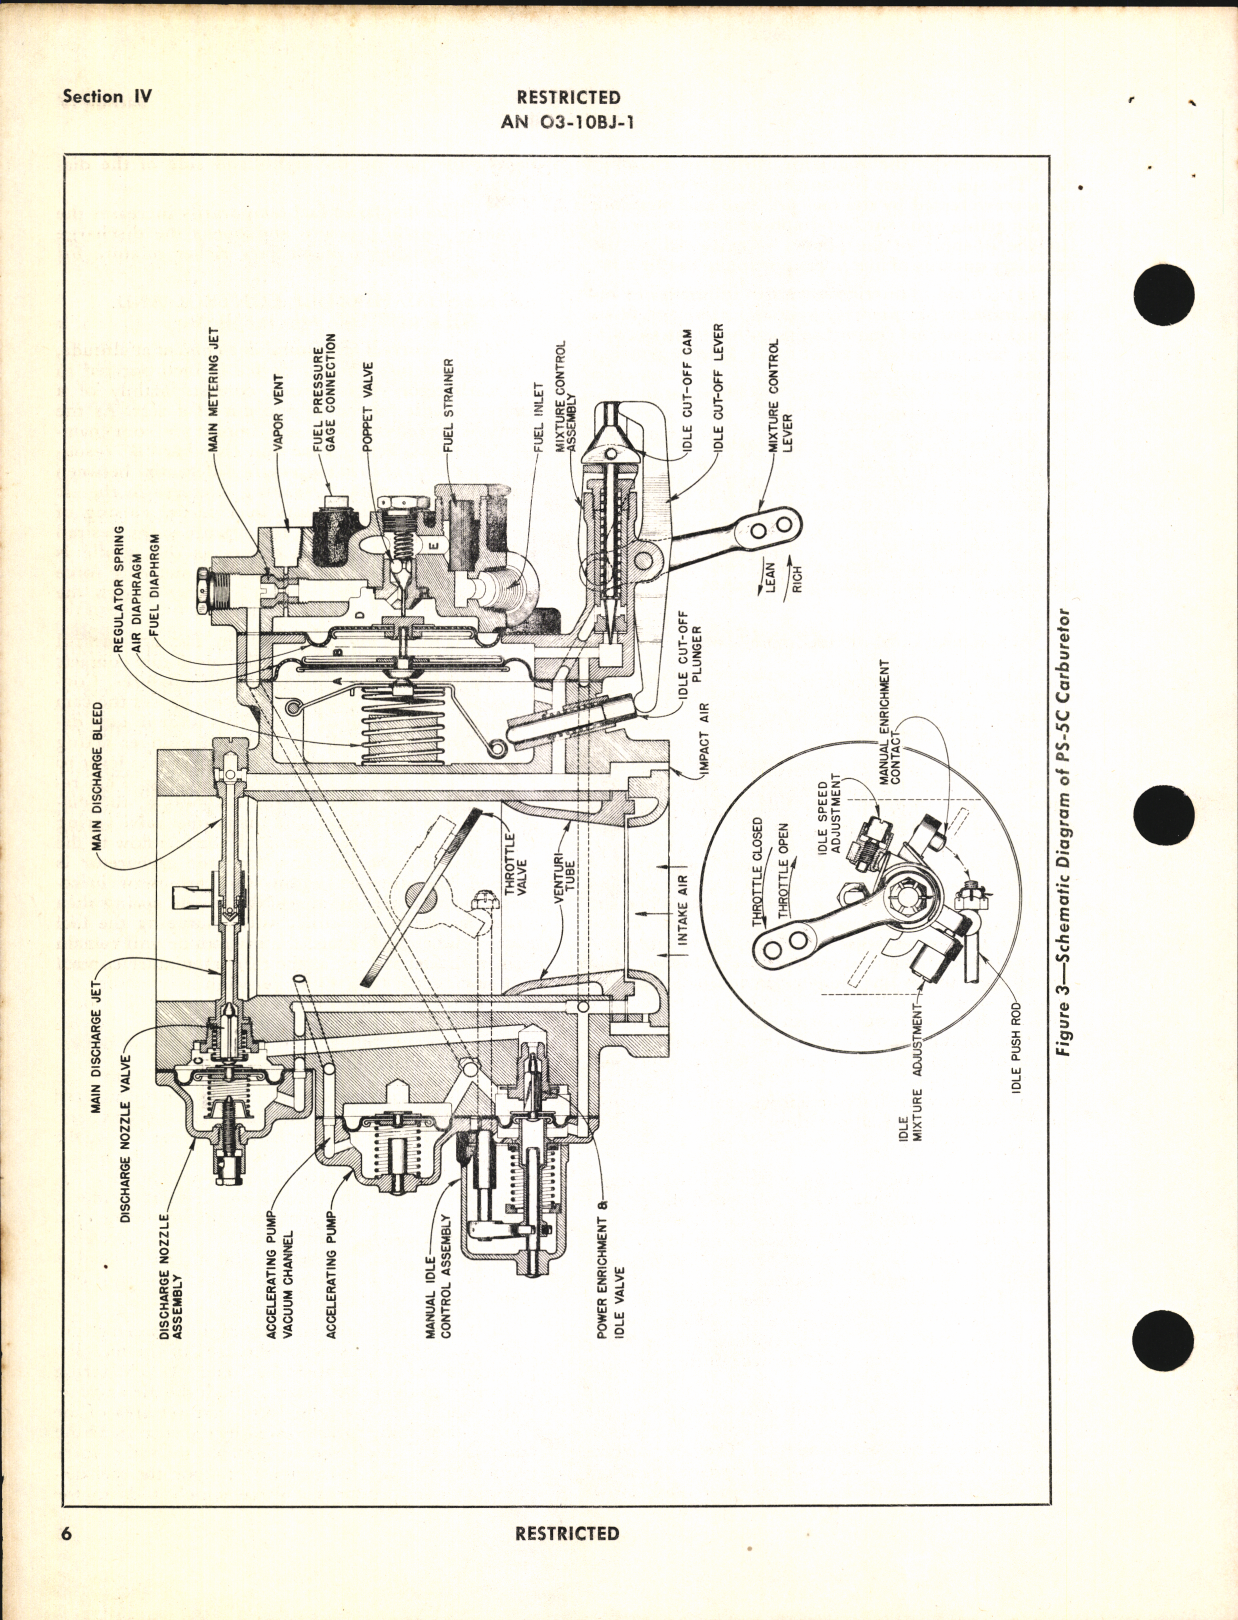 Sample page 8 from AirCorps Library document: Handbook of Instructions with Parts Catalog for Type PS-5C Injection Carburetor